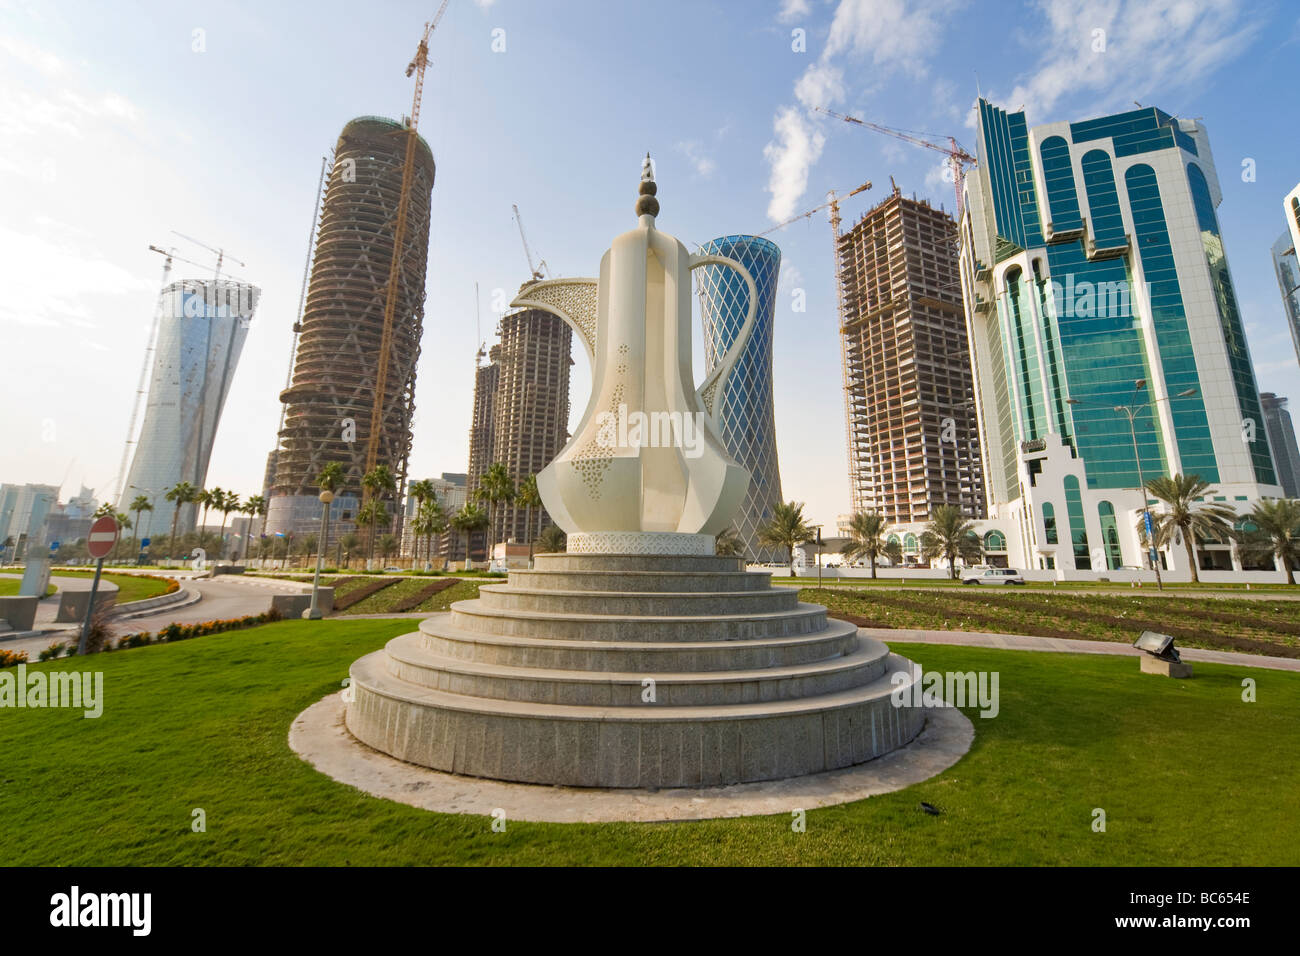 The Dallah coffee pot sculpture on the Corniche in Doha the capital of Qatar behind it are new high rise buildings being built Stock Photo